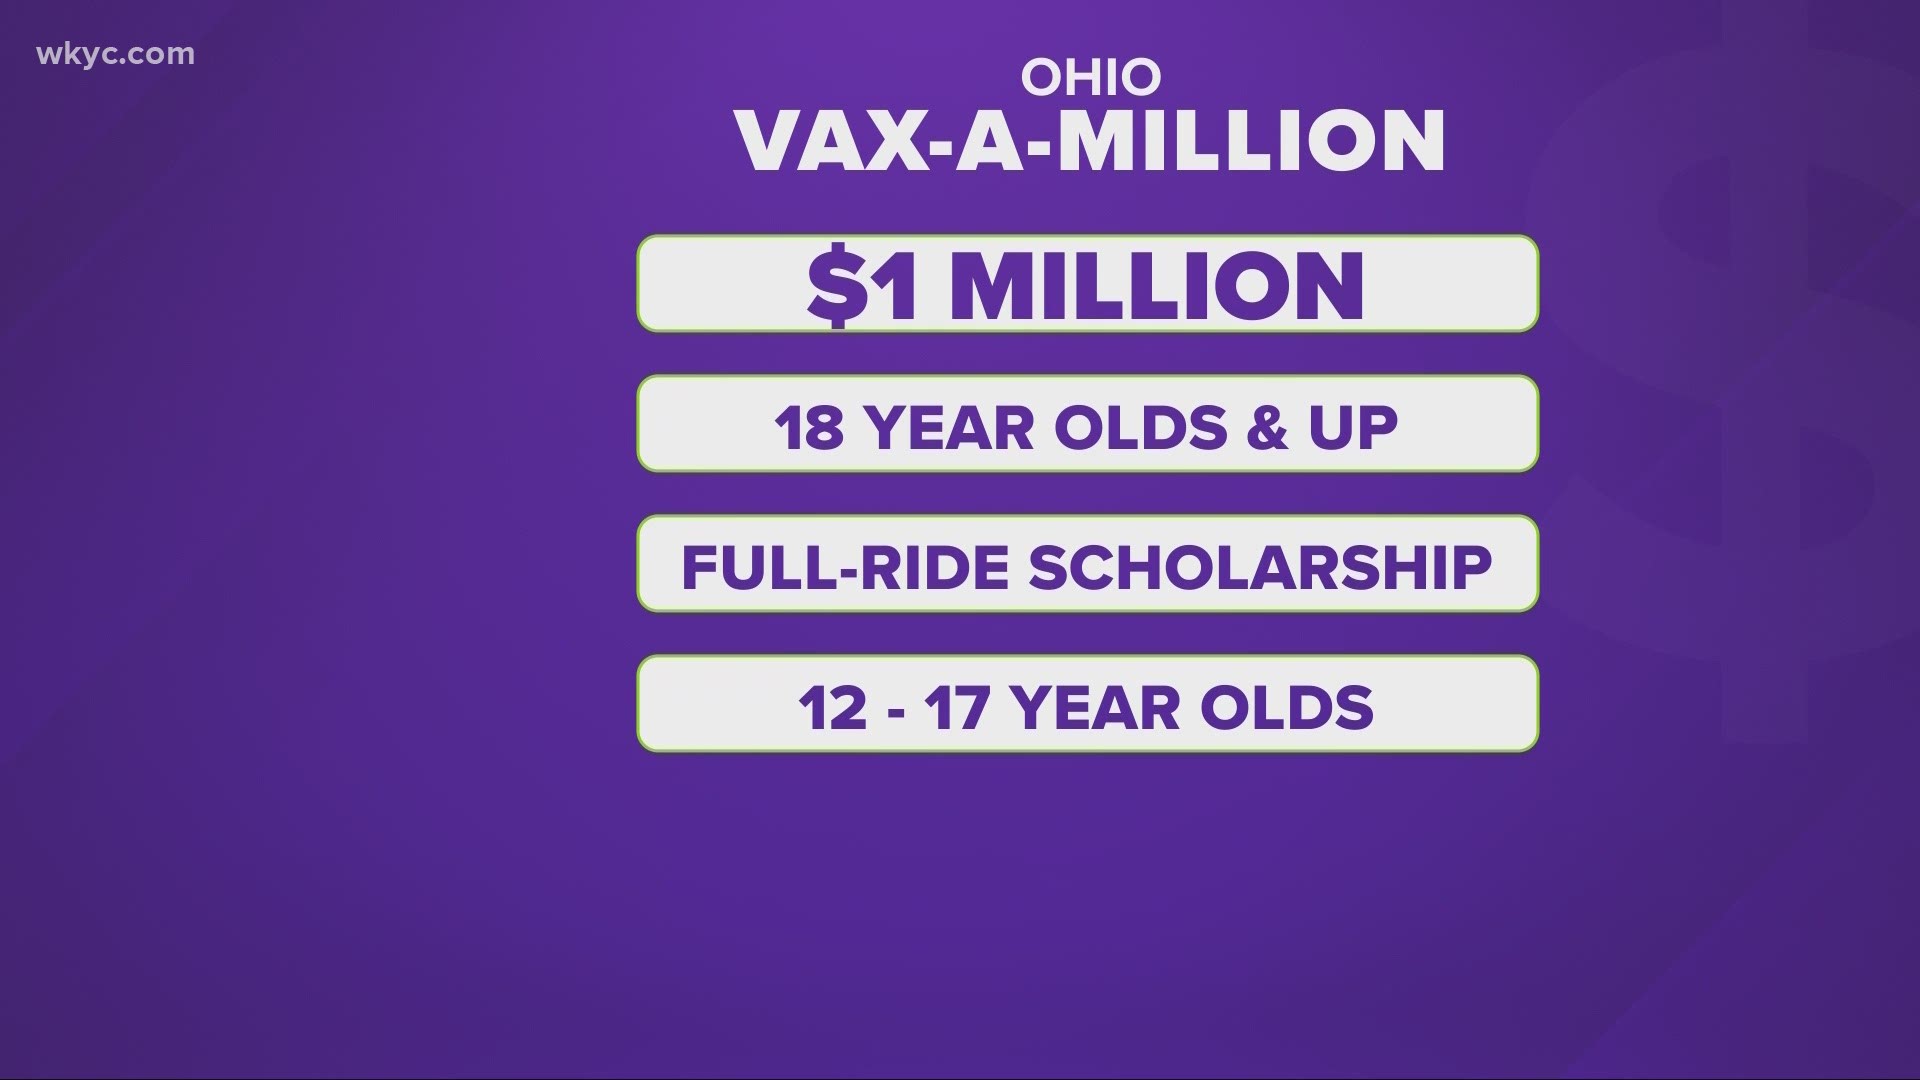 Here's your chance to win $1 million. Eligible Ohioans who have received at least one dose of a COVID vaccine can enter the state's Vax-a-Million contest.